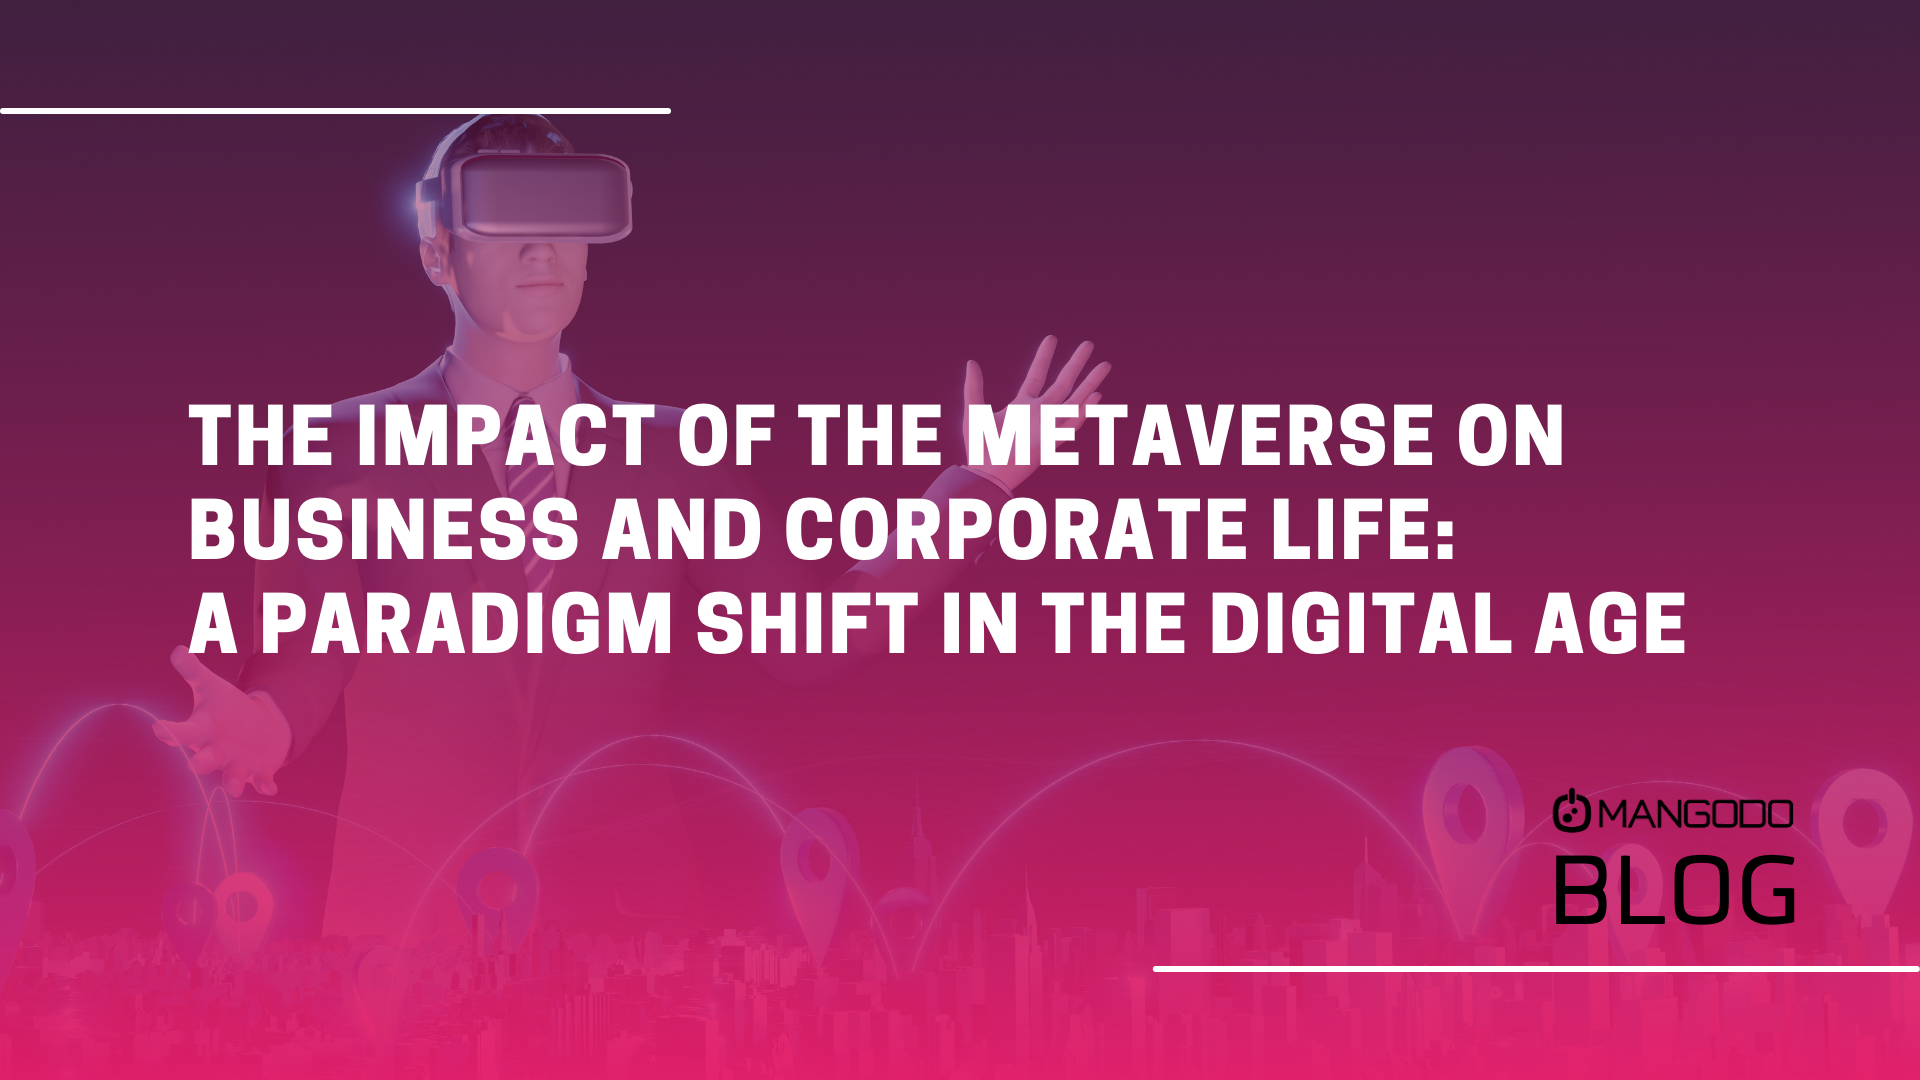 The Impact of the Metaverse on Business and Corporate Life: A Paradigm Shift in the Digital Age